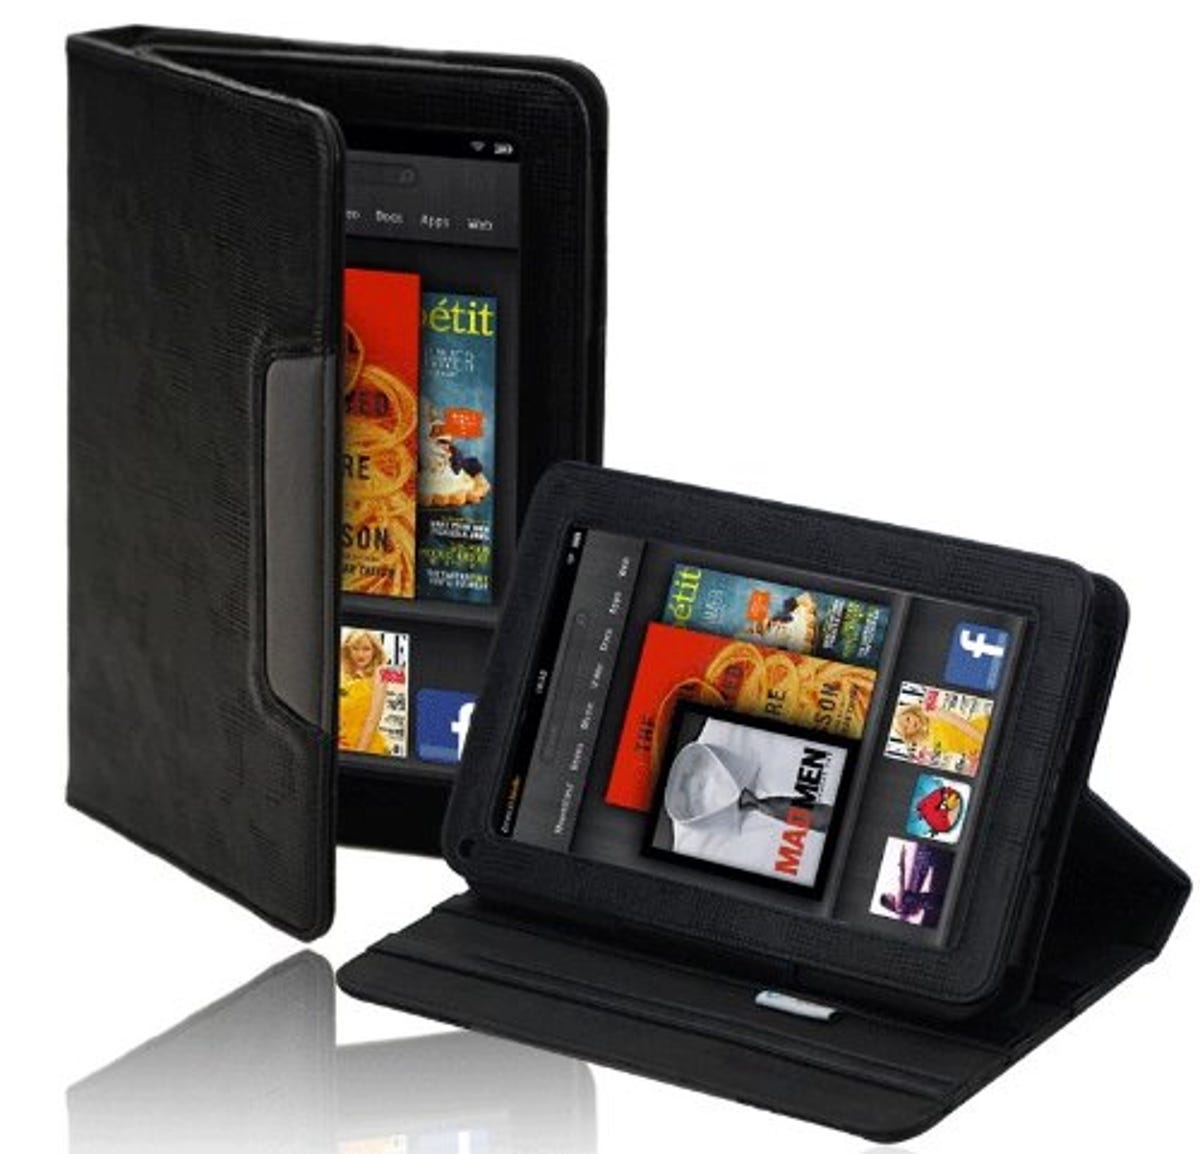 20 best Kindle covers and accessories (photos) - CNET